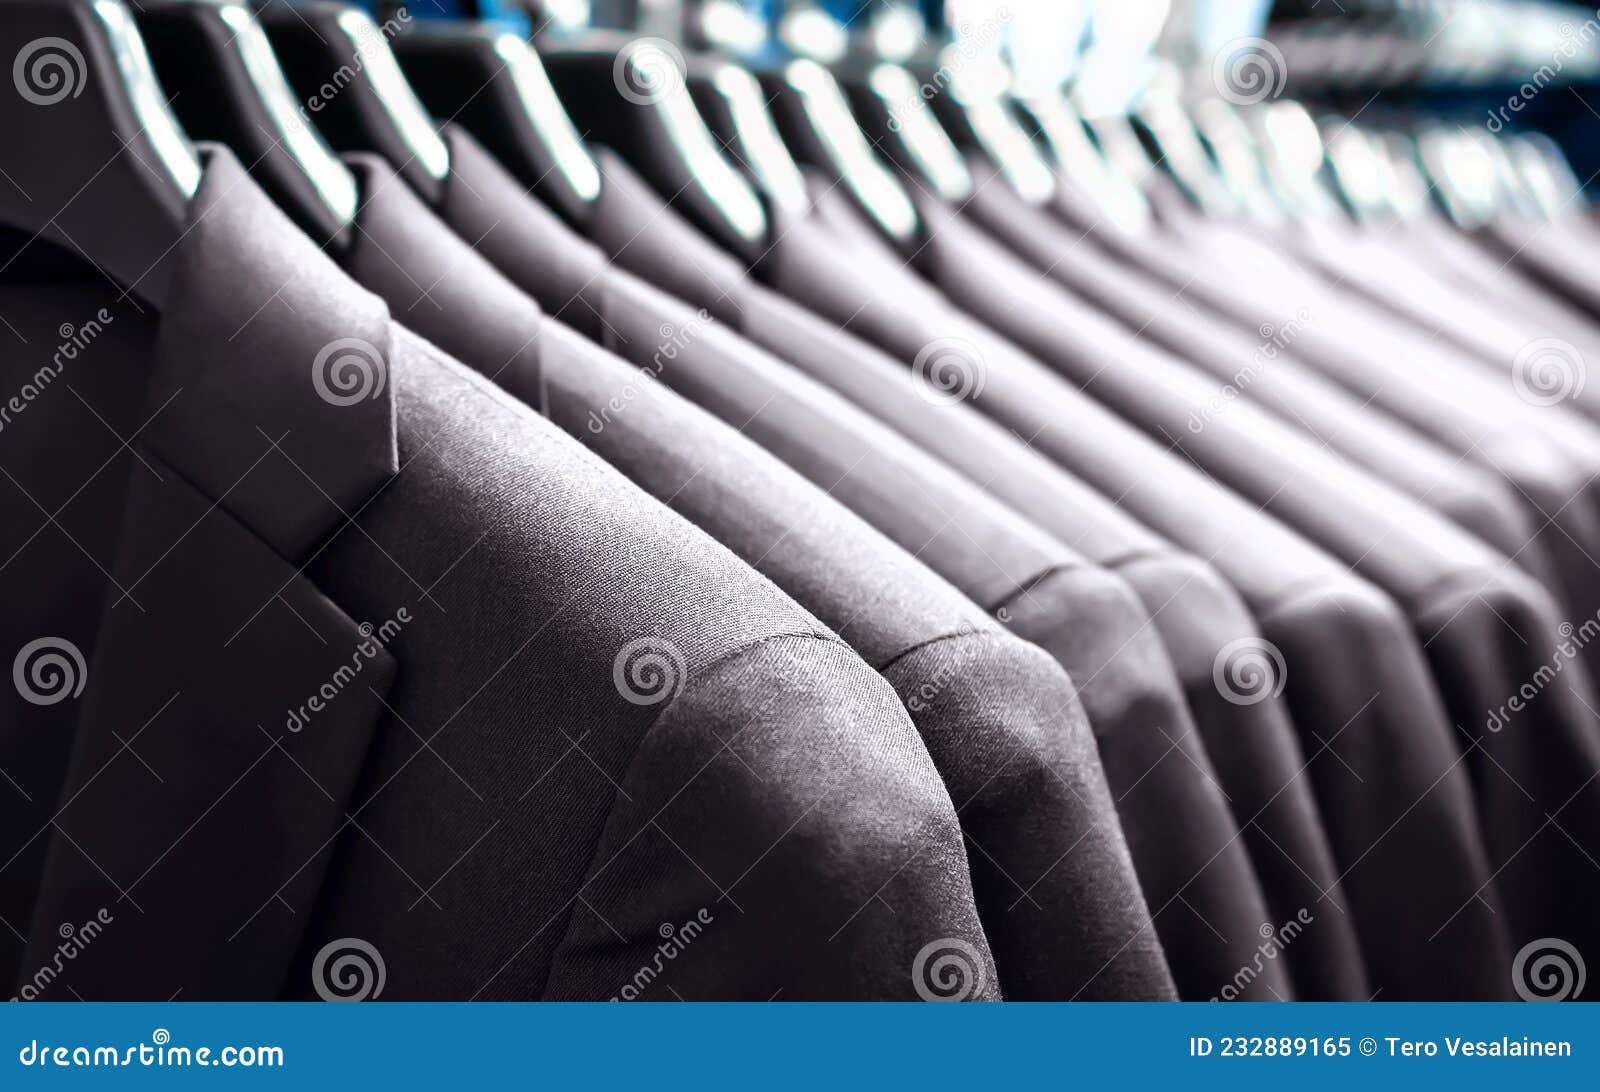 Suit Jackets in Hanger in Men Fashion and Apparel Store. Row of Many ...